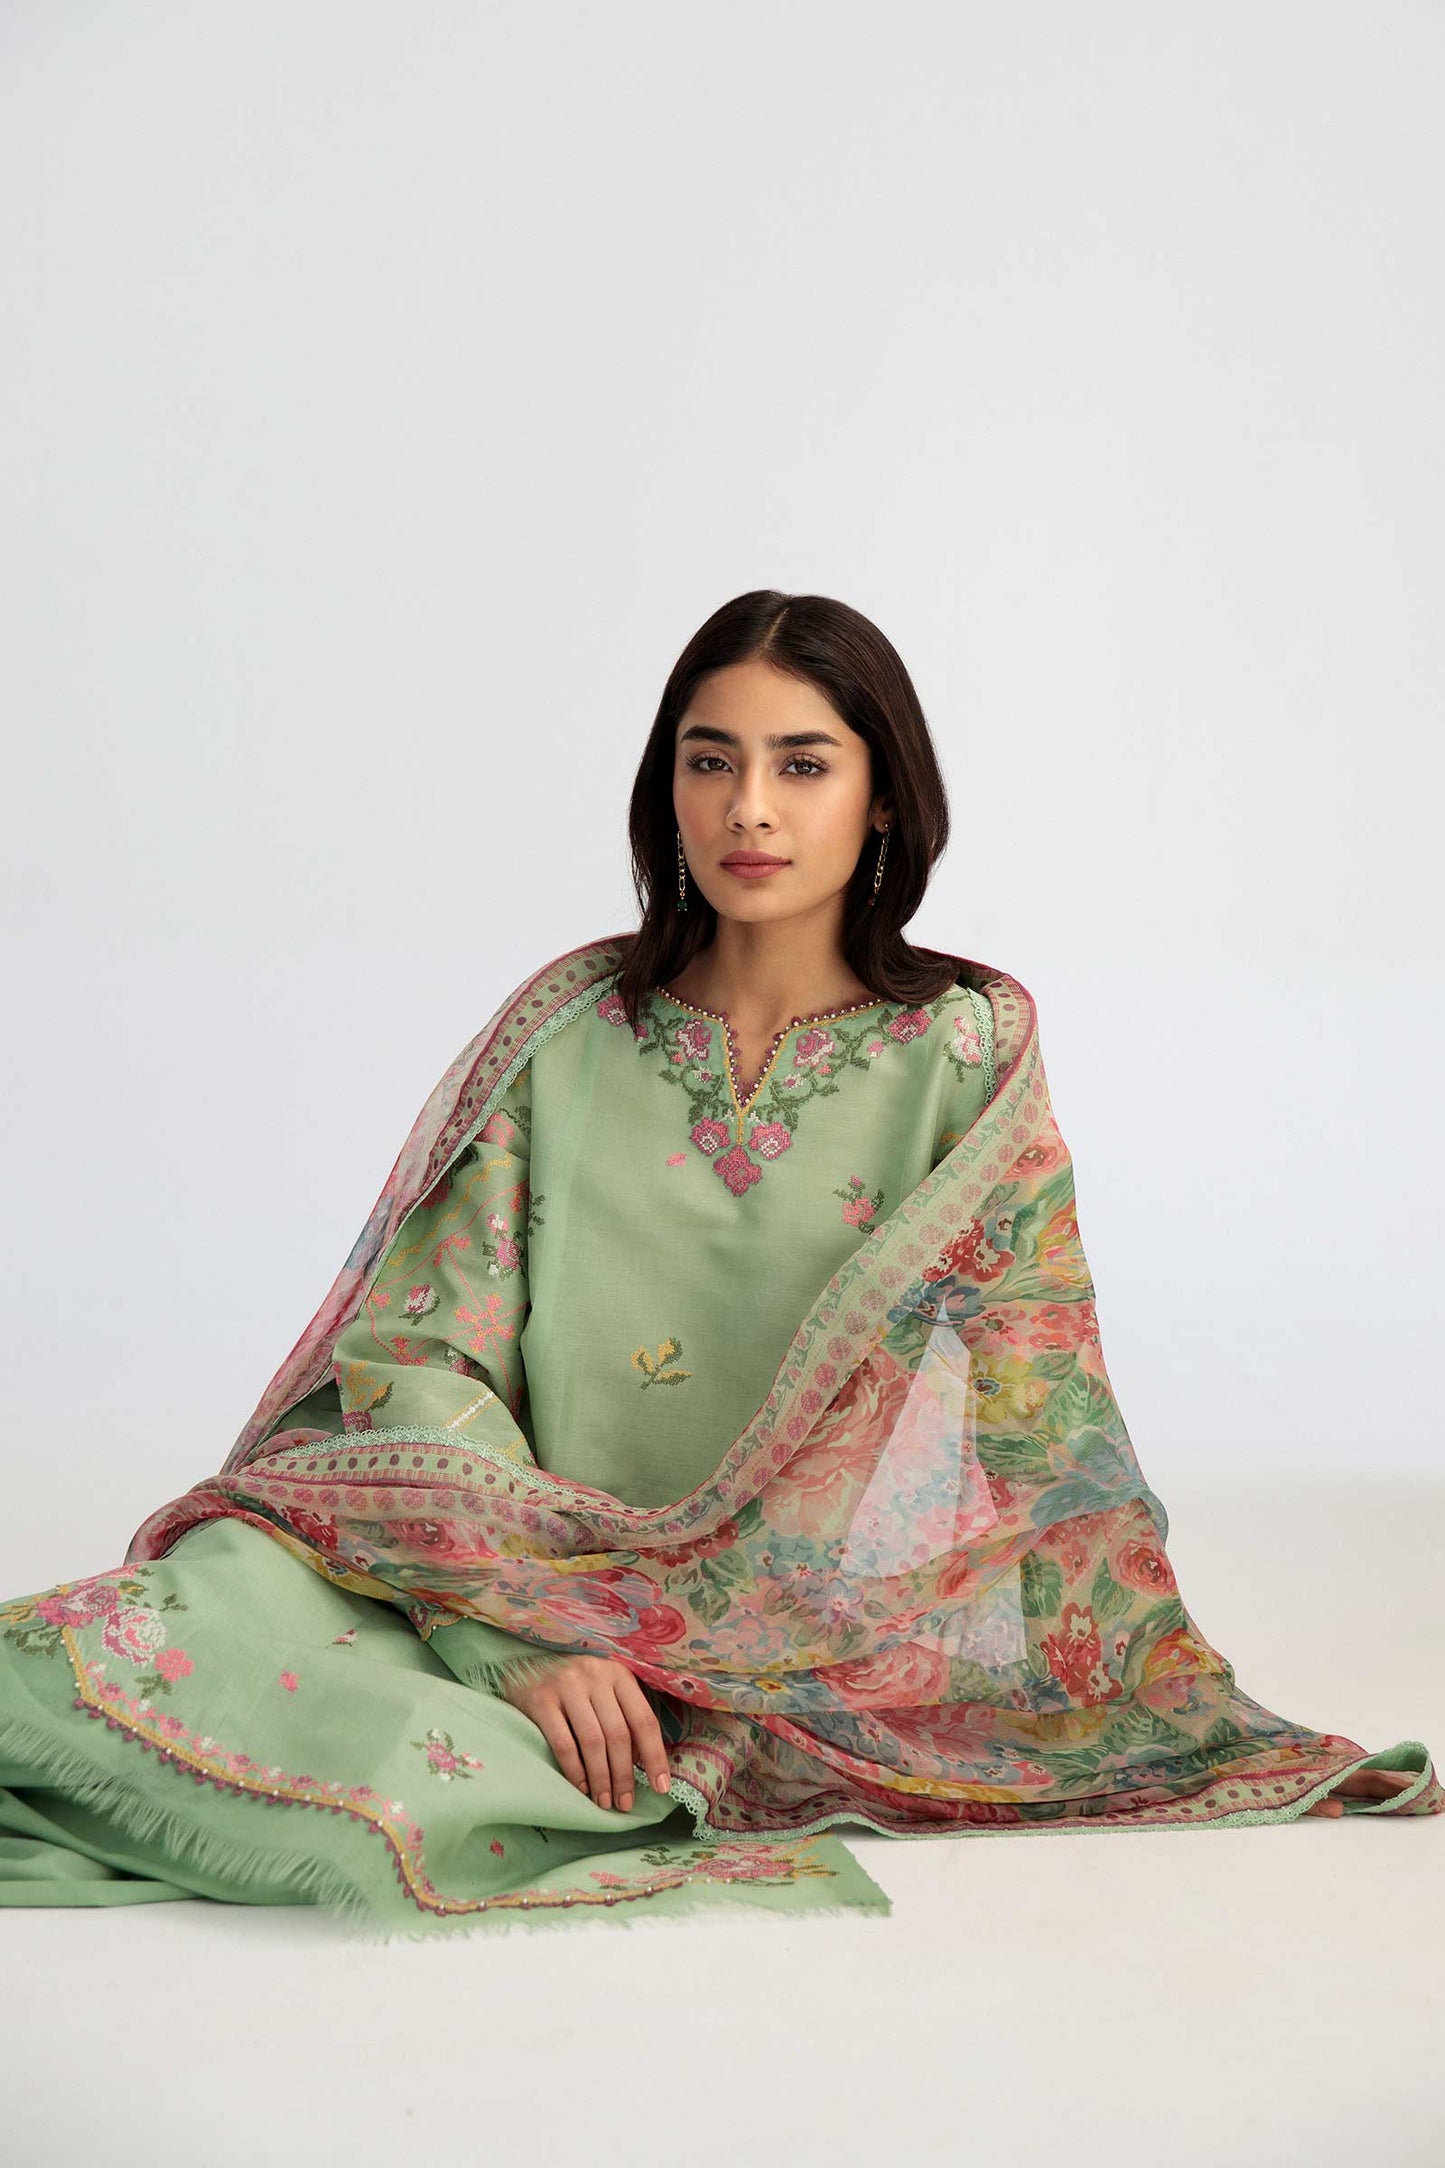 Coco by Zara Shahjahan Embroidered Lawn Suits Unstitched 3 Piece Z23-2b